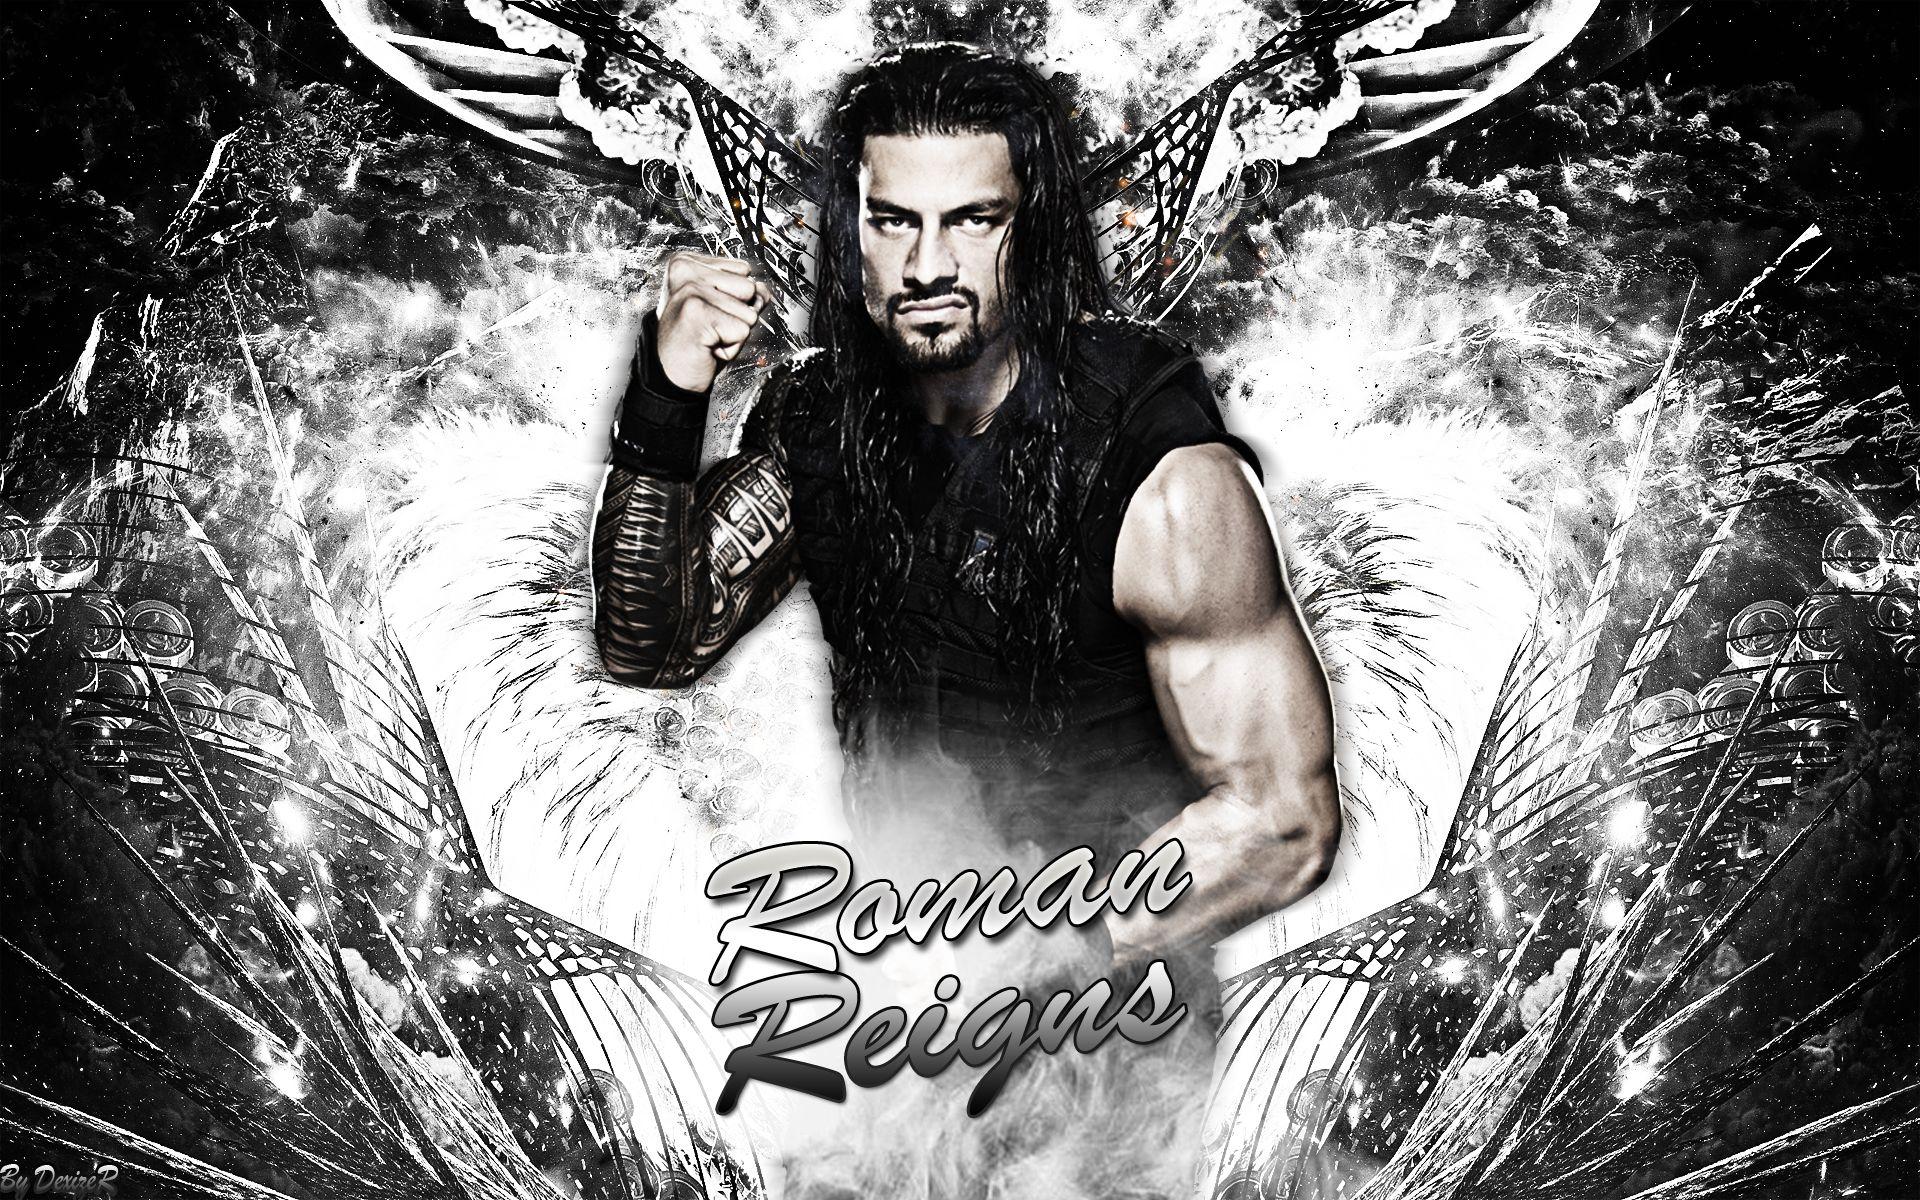 Roman Reigns as a Background